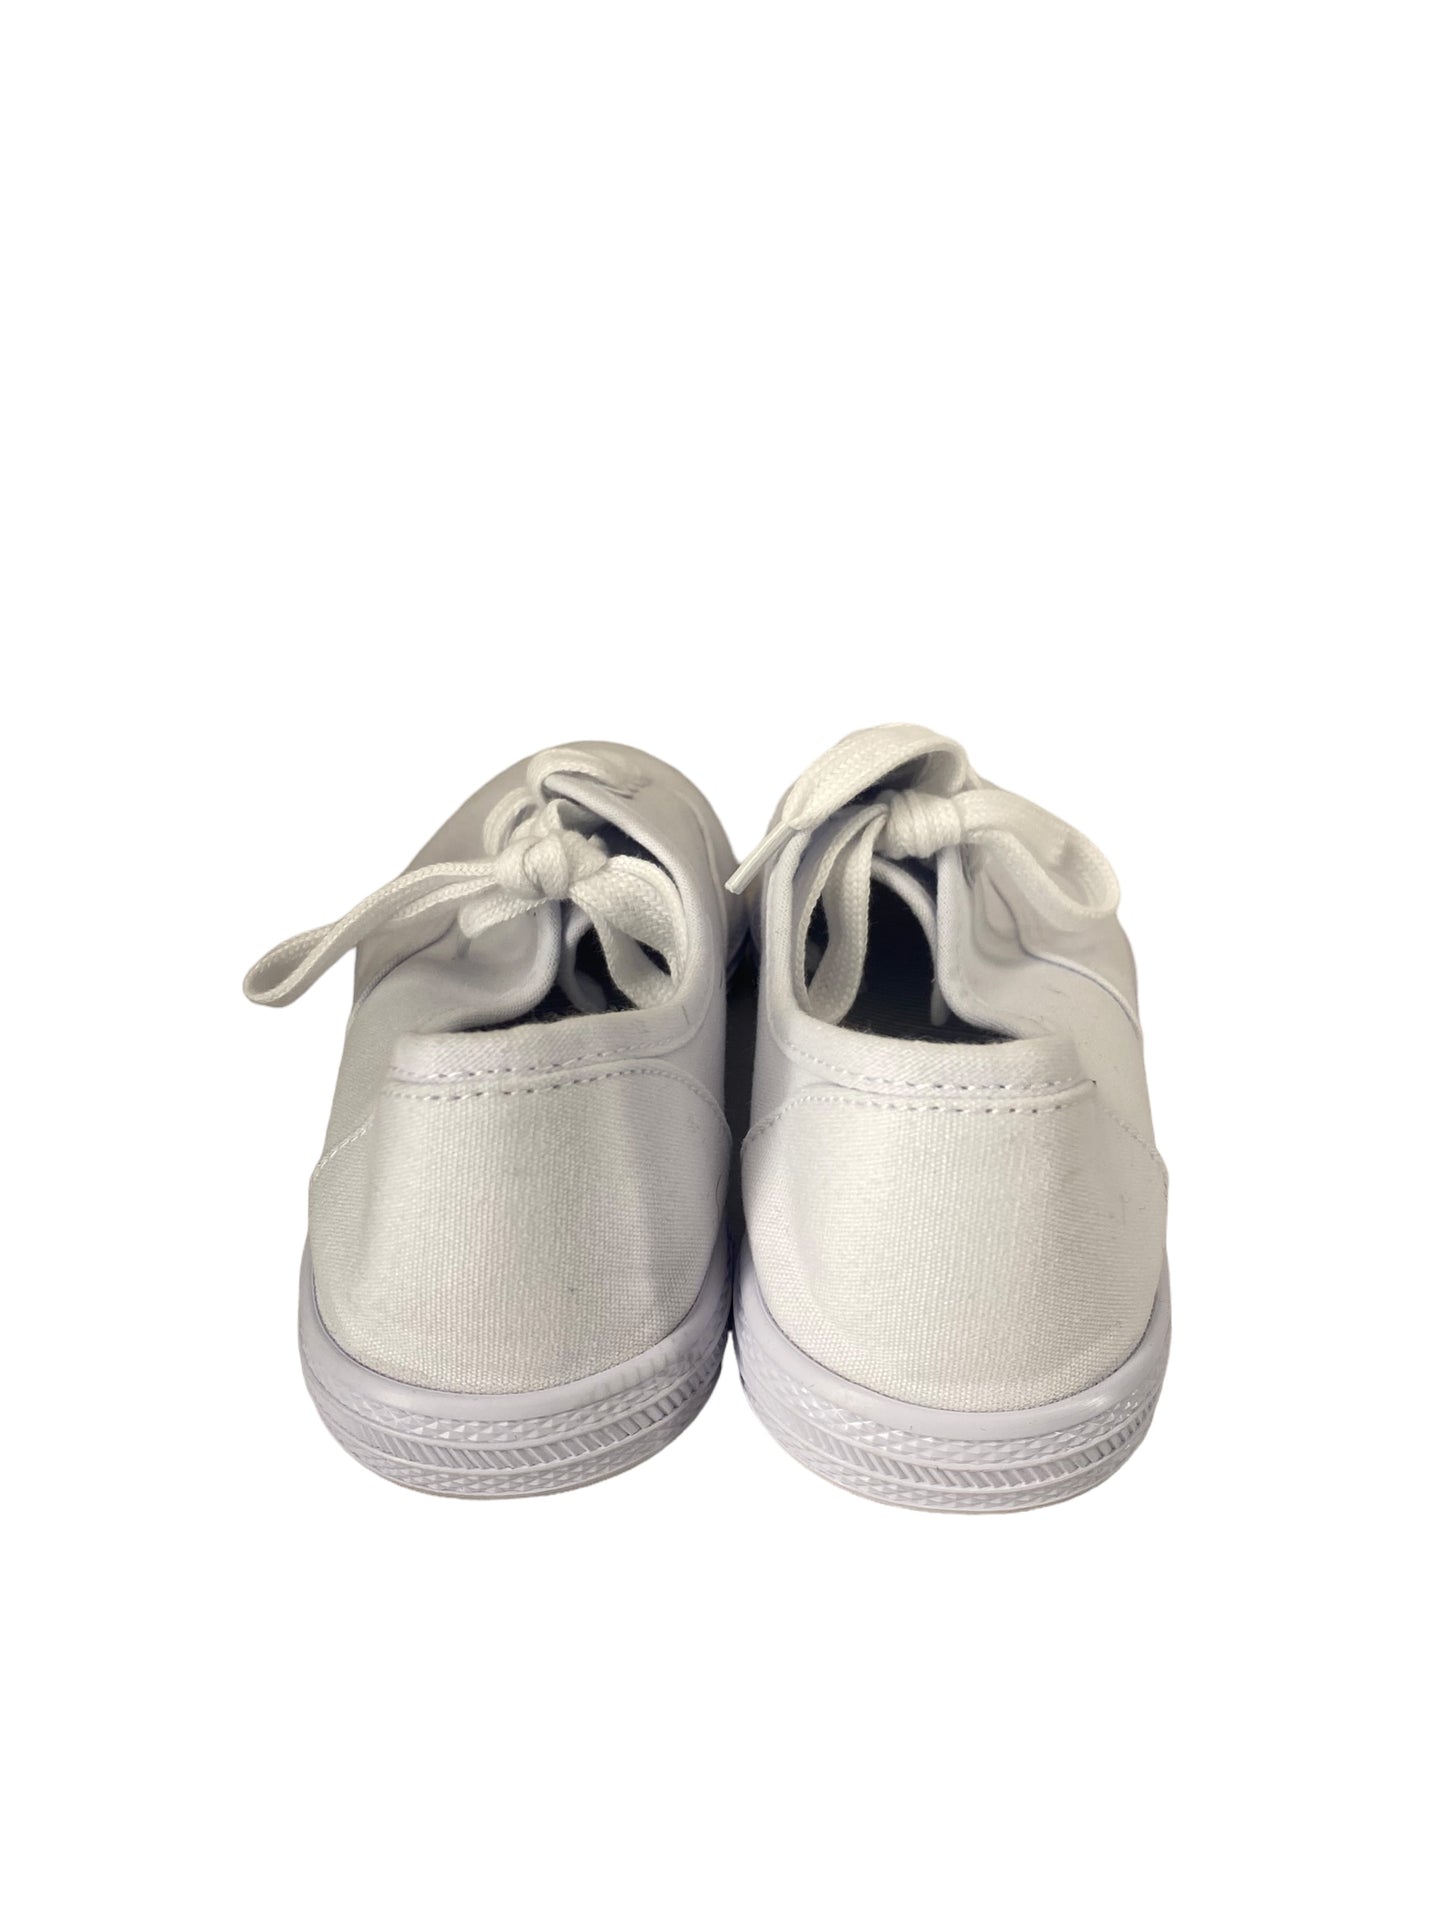 Shoes Sneakers By Universal Thread  Size: 6